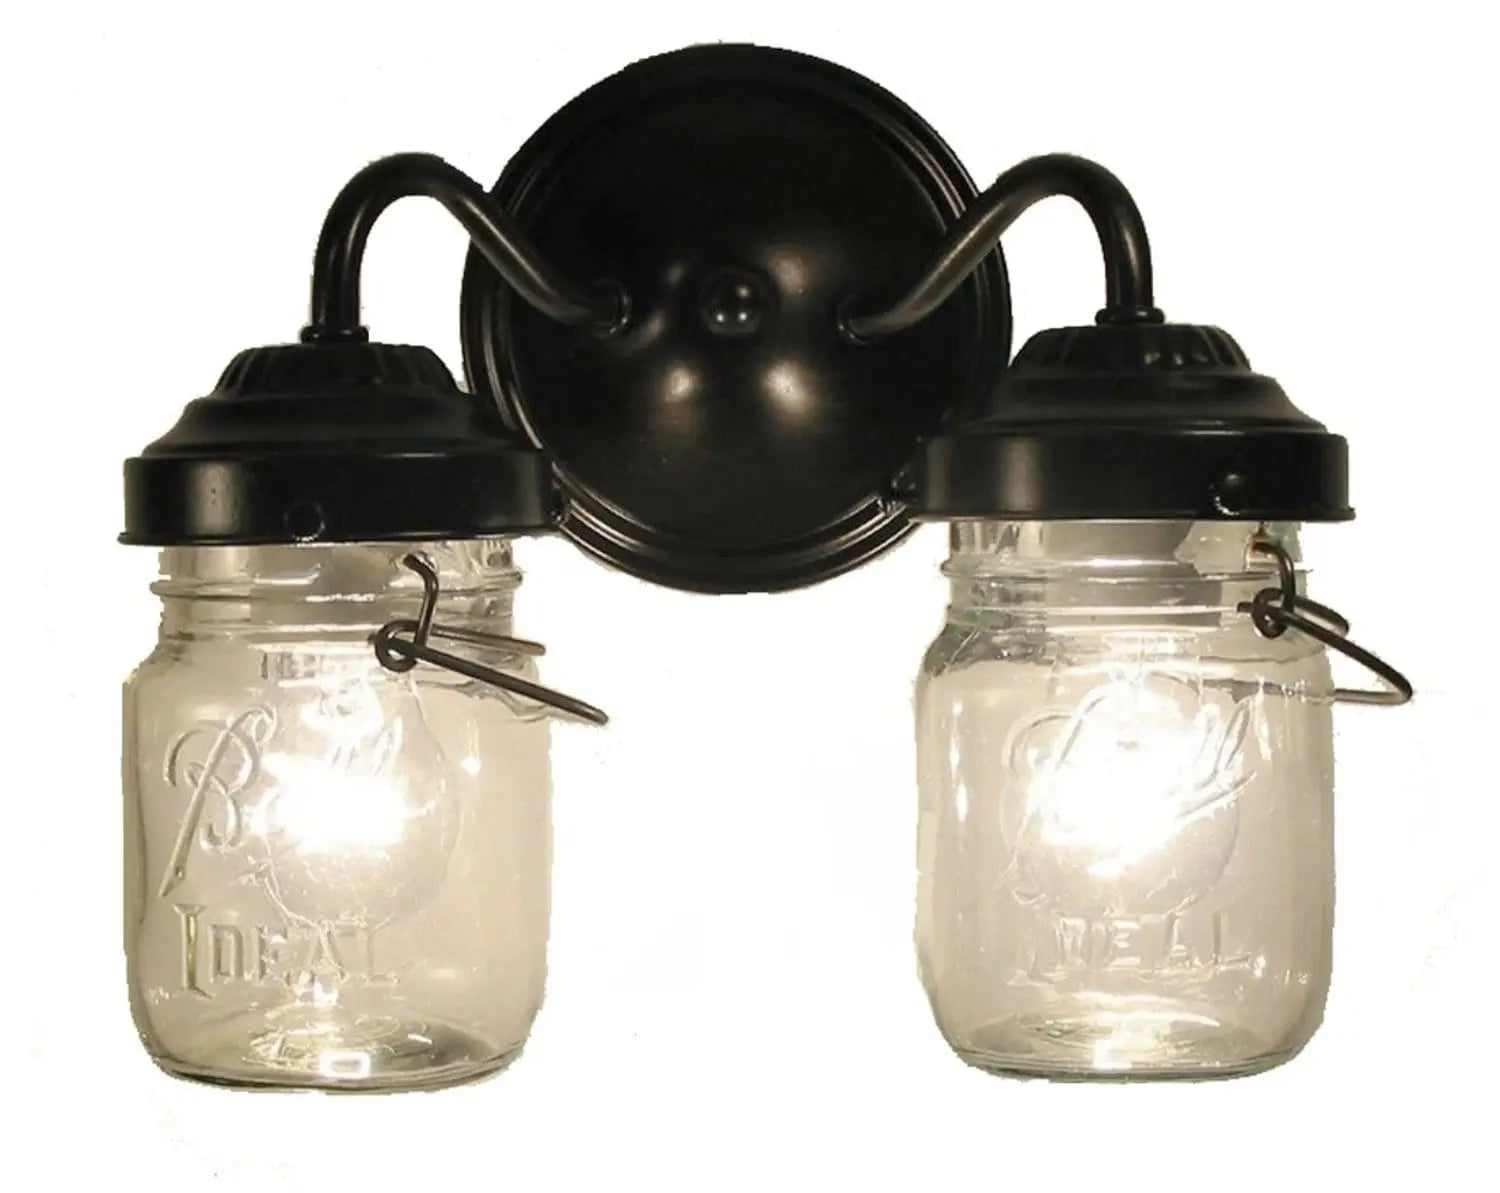 Canning Jar WALL LIGHT Double Vintage Pints - The Lamp Goods